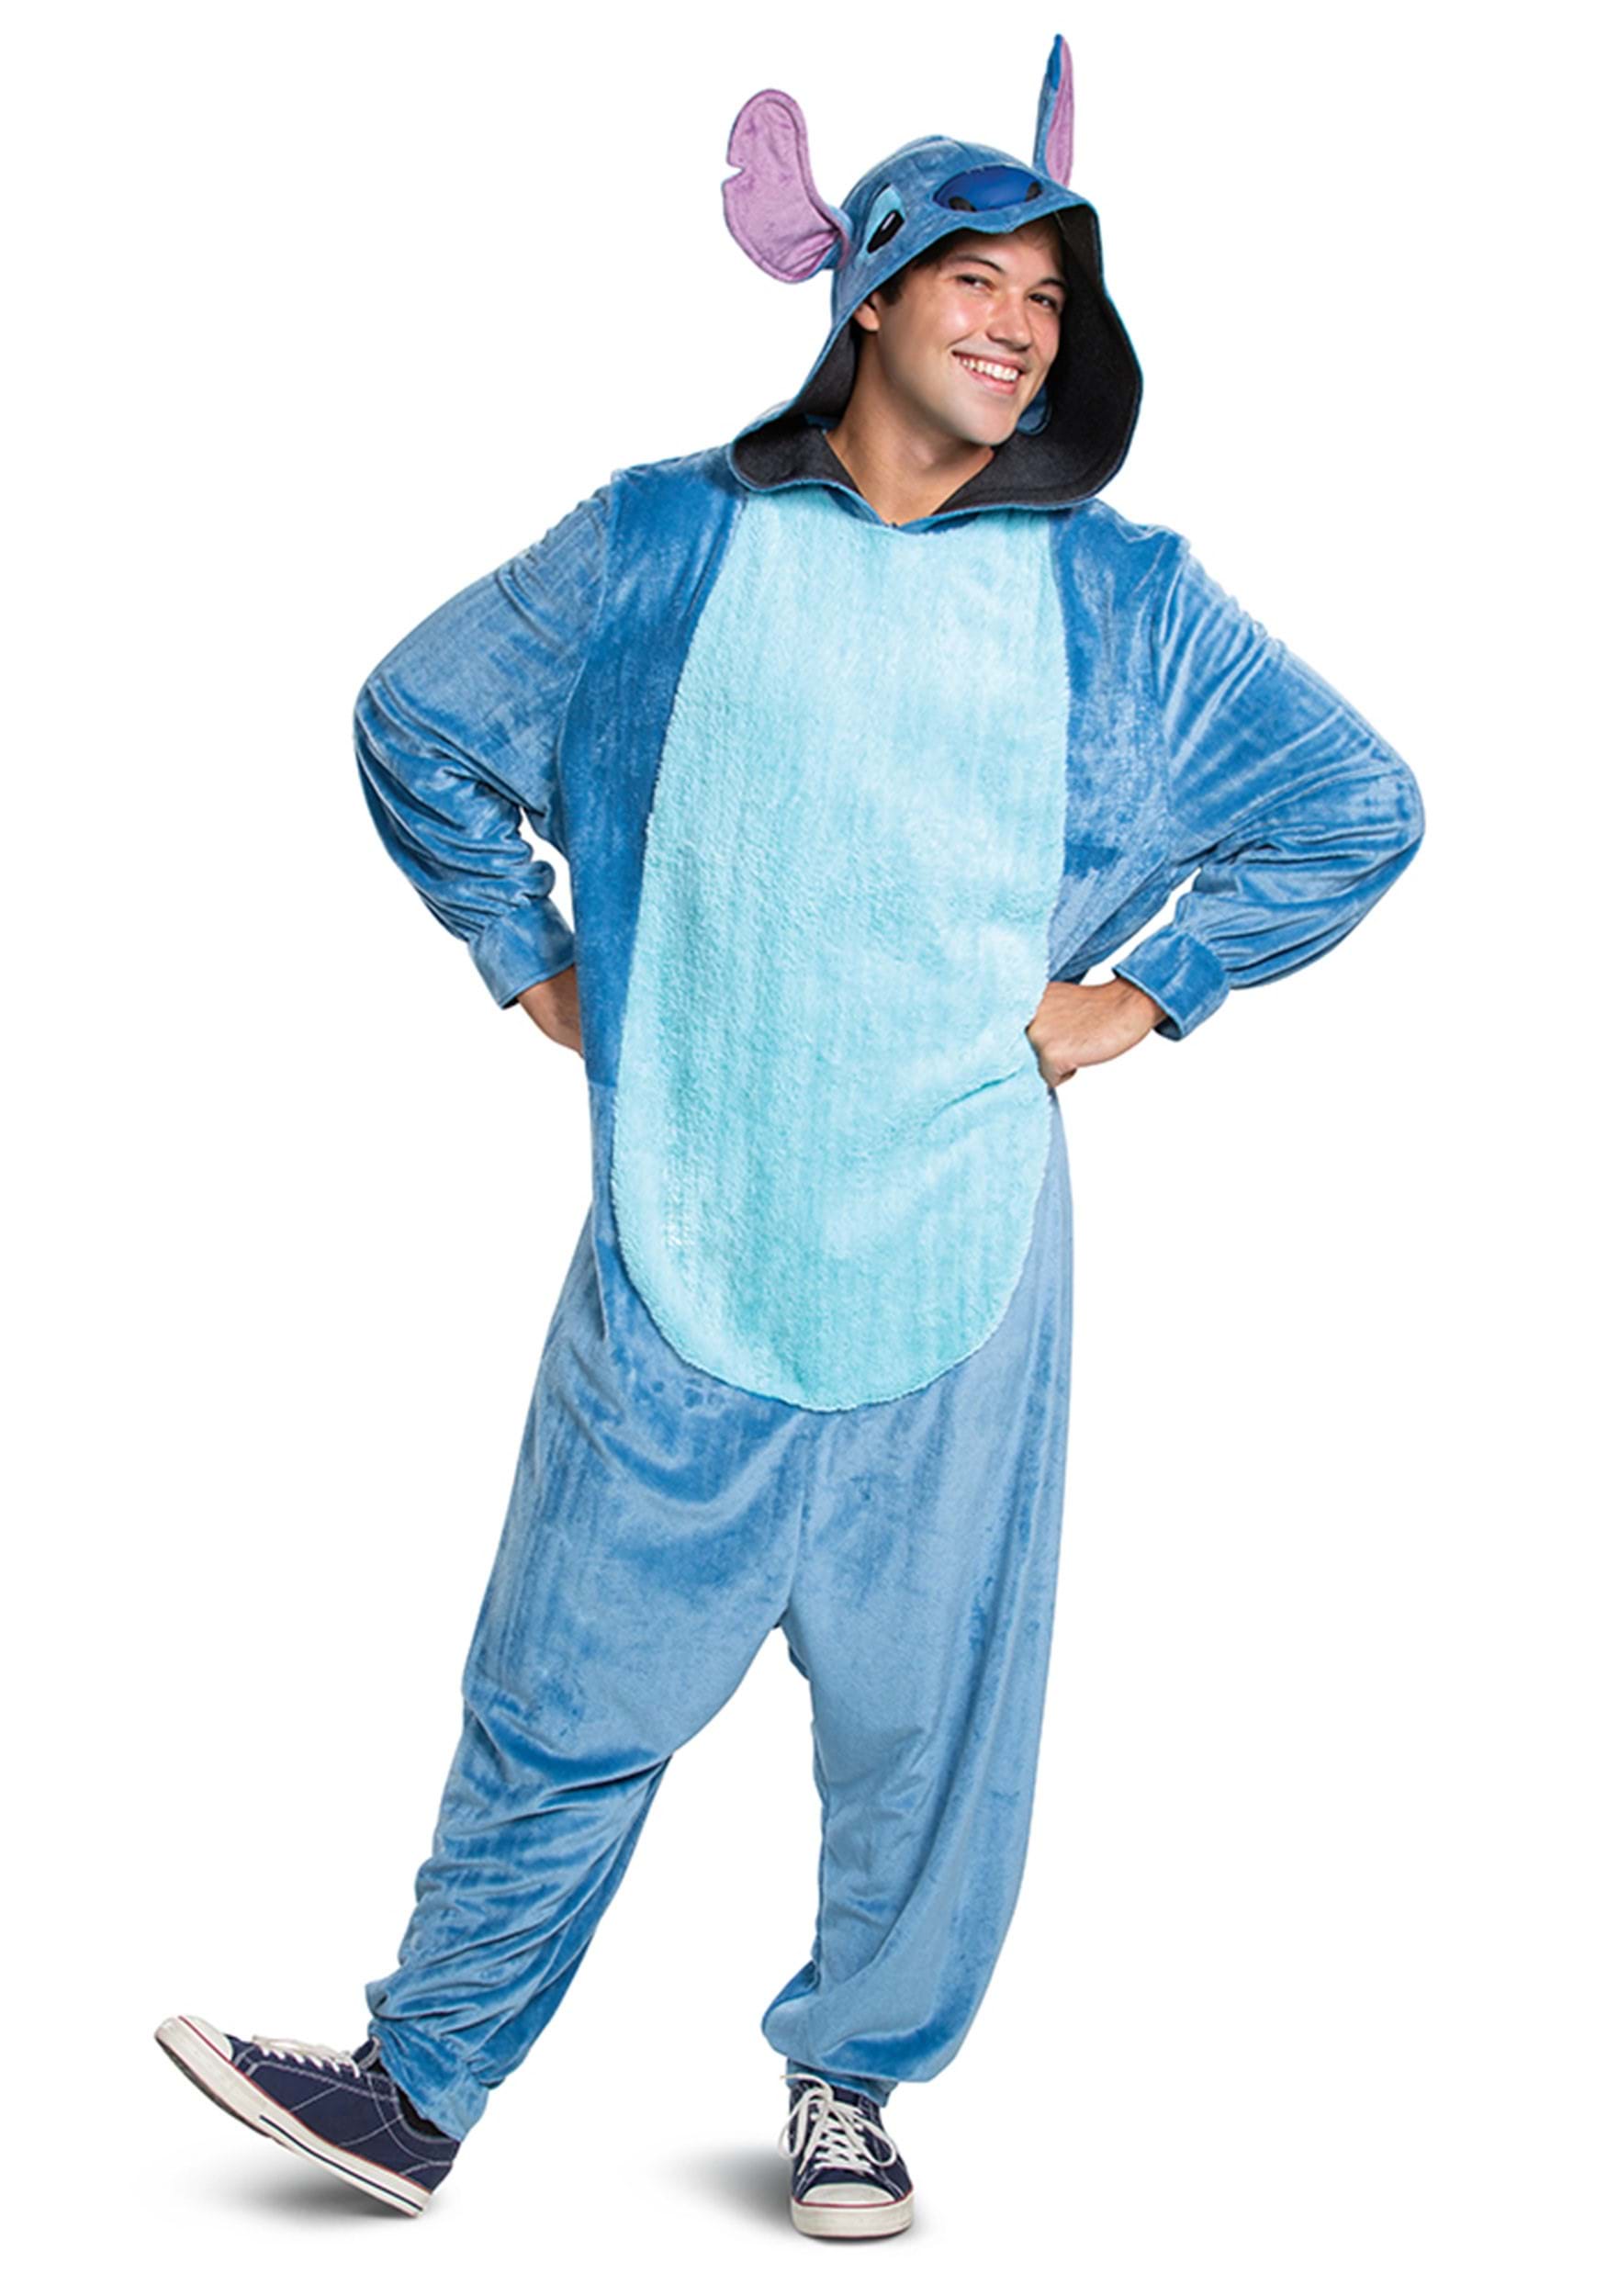 Image of Adult Deluxe Stitch Costume ID DI116549-XL